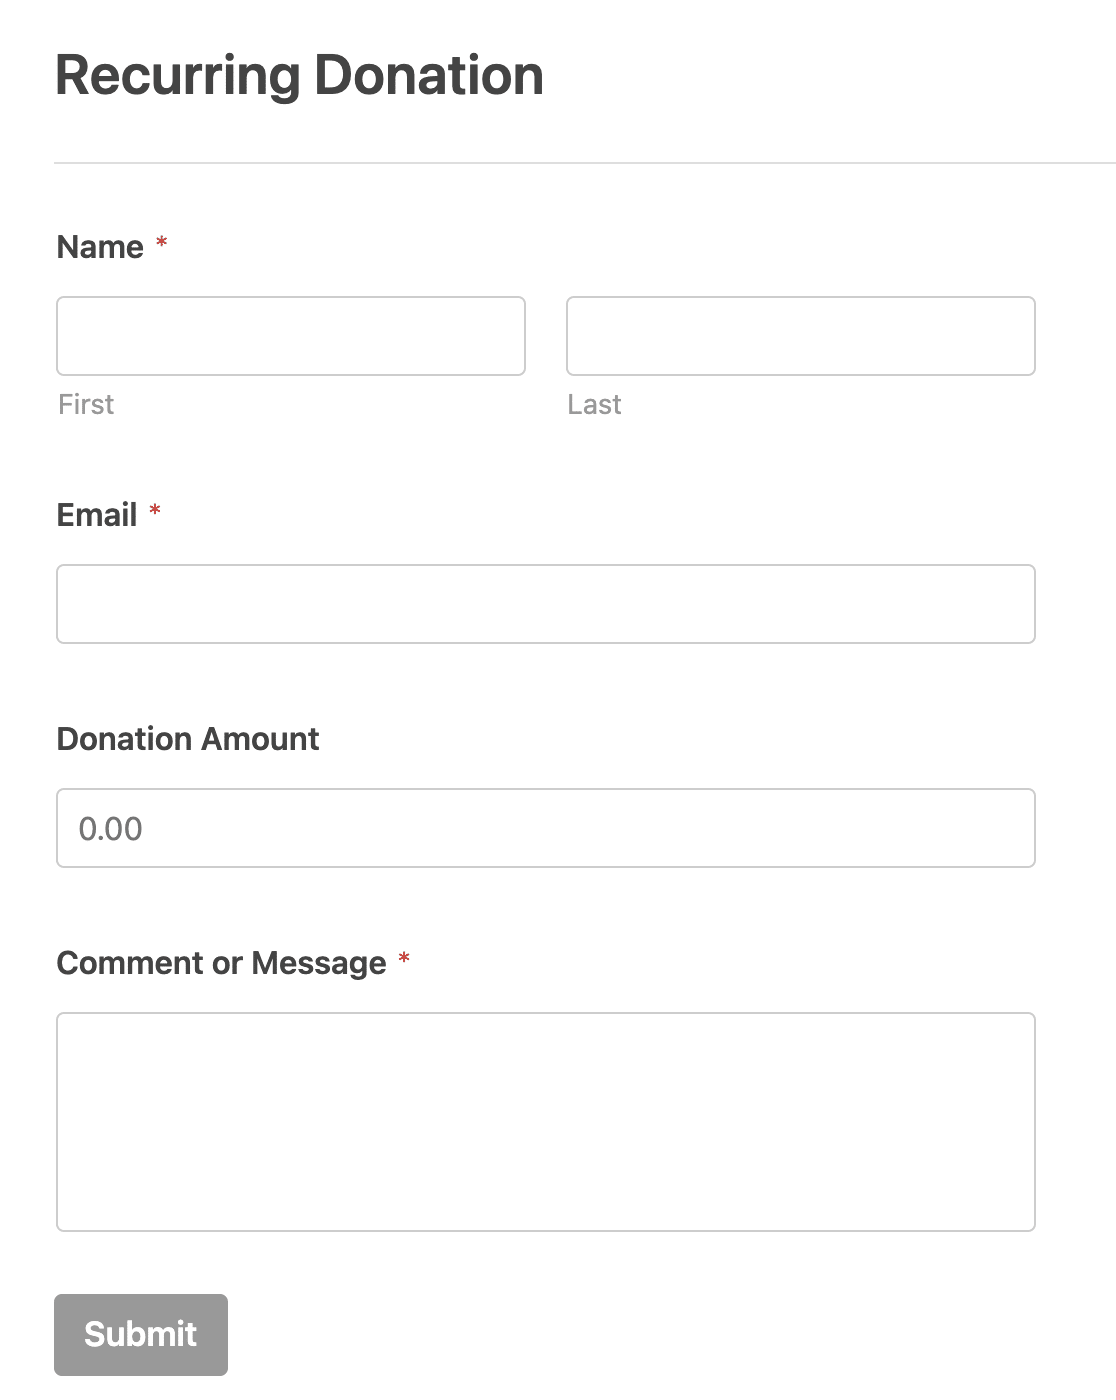 The WPForms Donation Form template